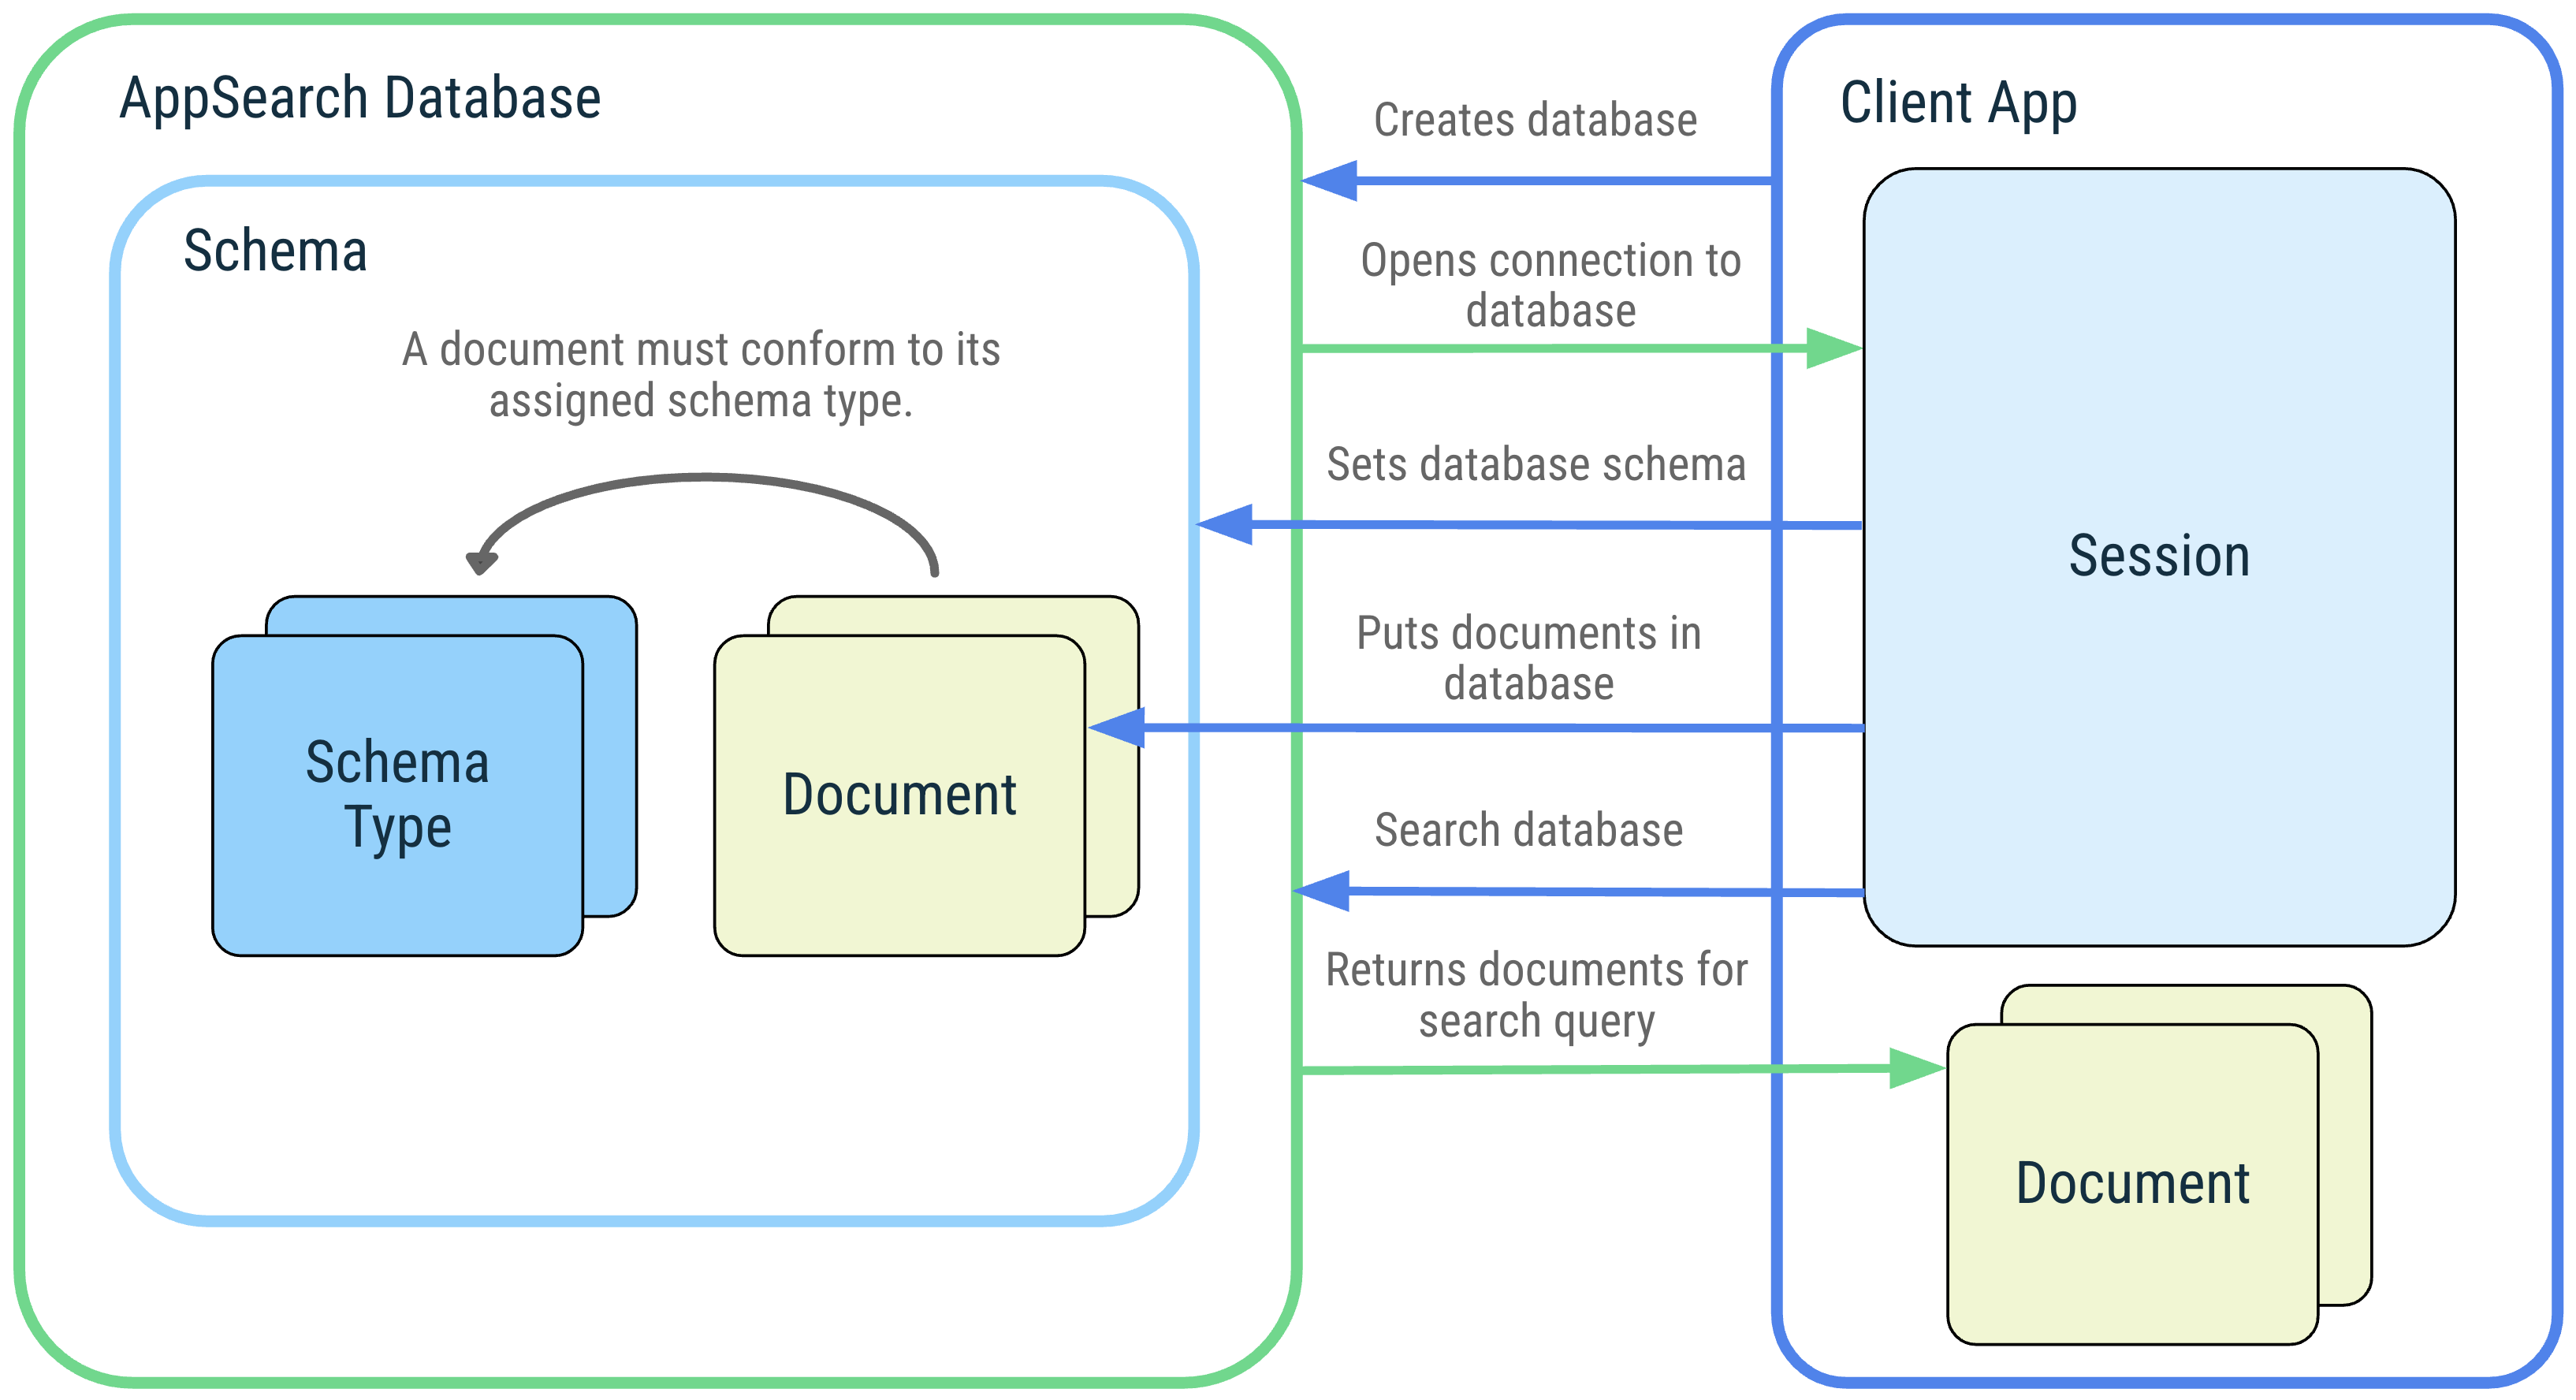 Diagram
outline of a client application and its interactions with the following
AppSearch concepts: AppSearch database, schema, schema types, documents,
session, and search.